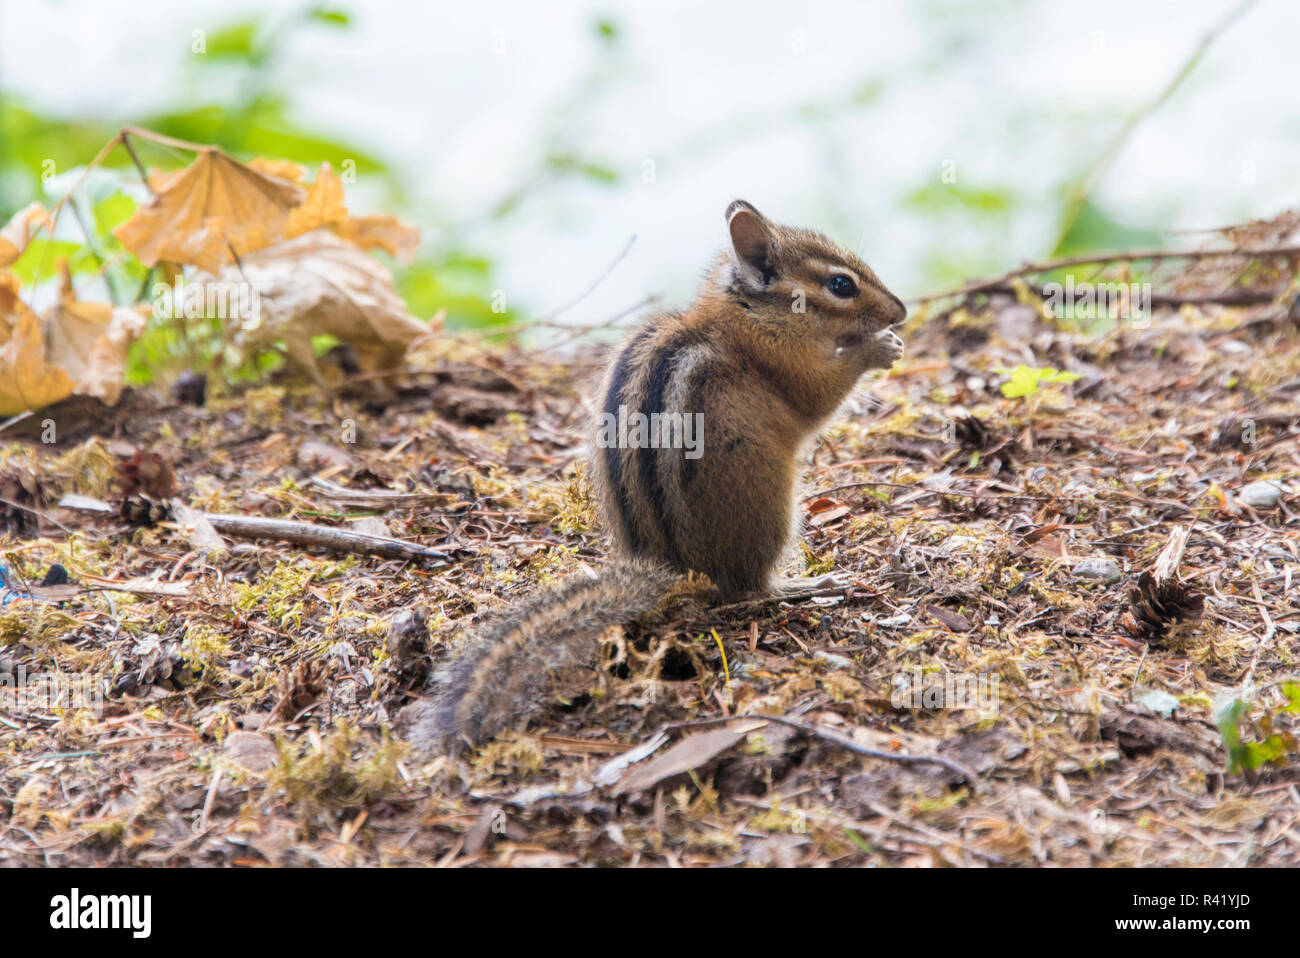 USA, Washington State. Mt. Baker Snoqualmie National Forest. Campground chipmunk Stock Photo